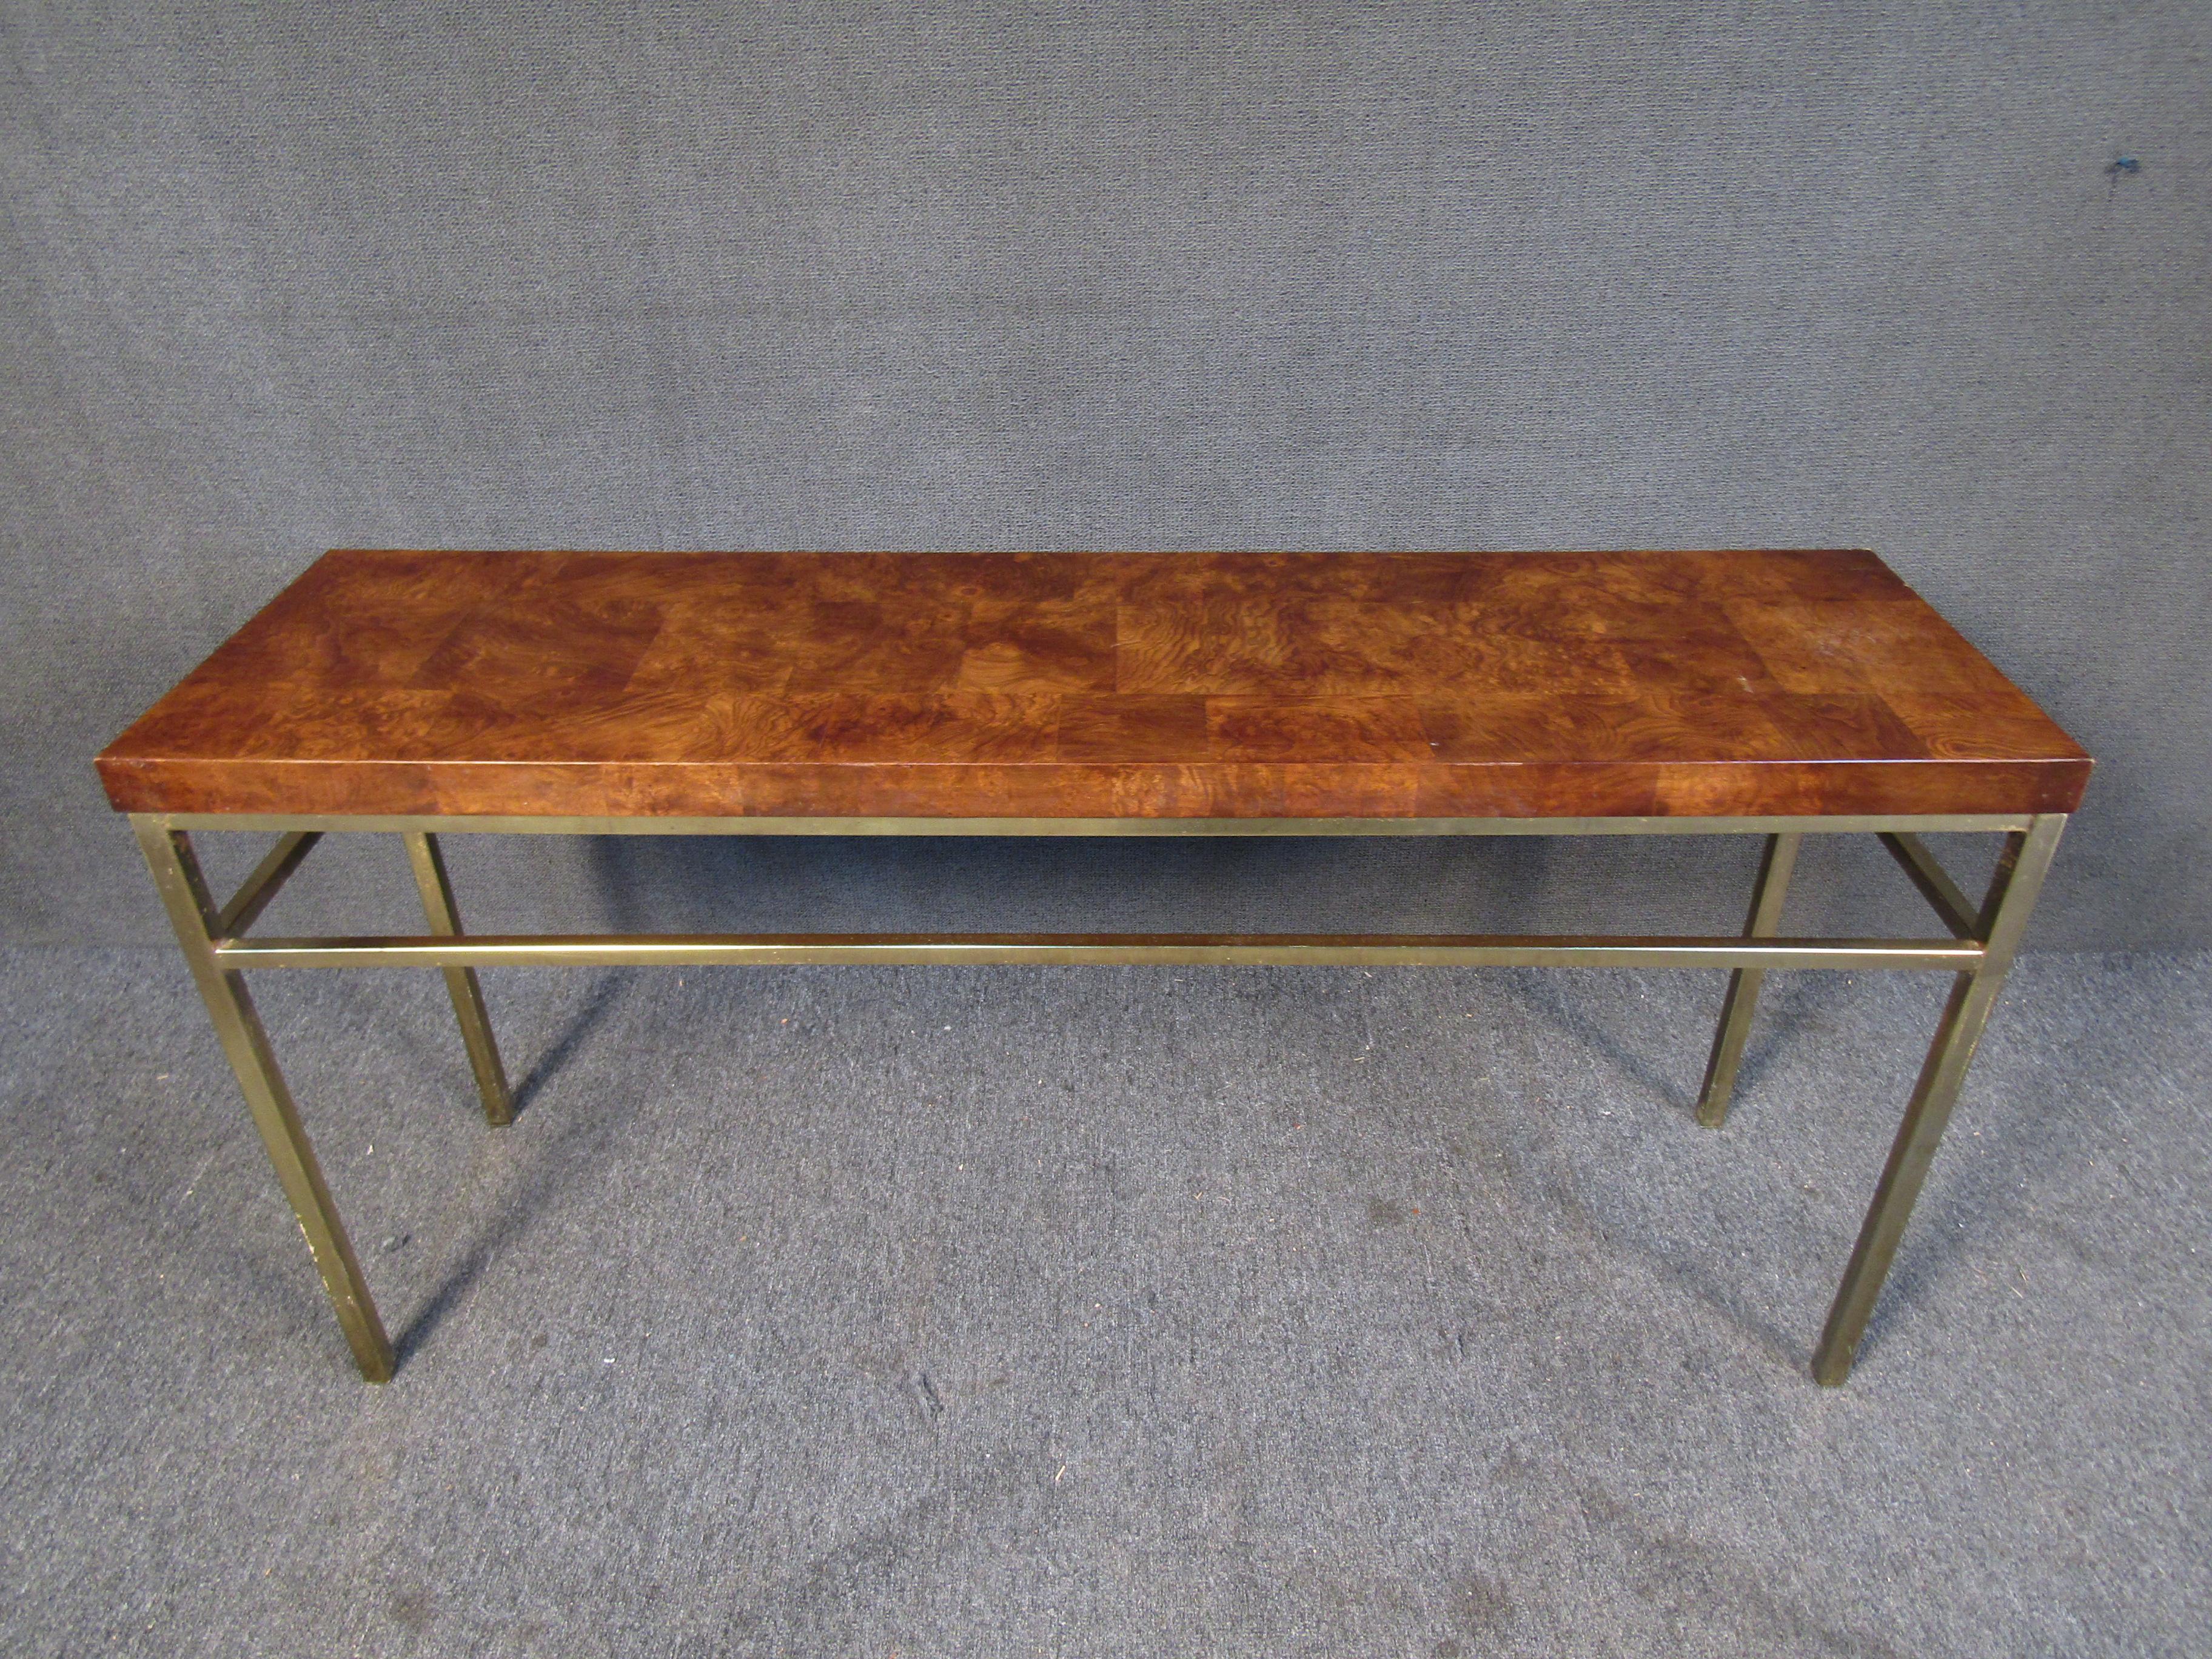 With a unique surface using contrasting squares of burl wood, this Mid-Century Modern console table features an interesting base of metal with a yellowish golden tint. Please confirm item location with seller (NY/NJ).